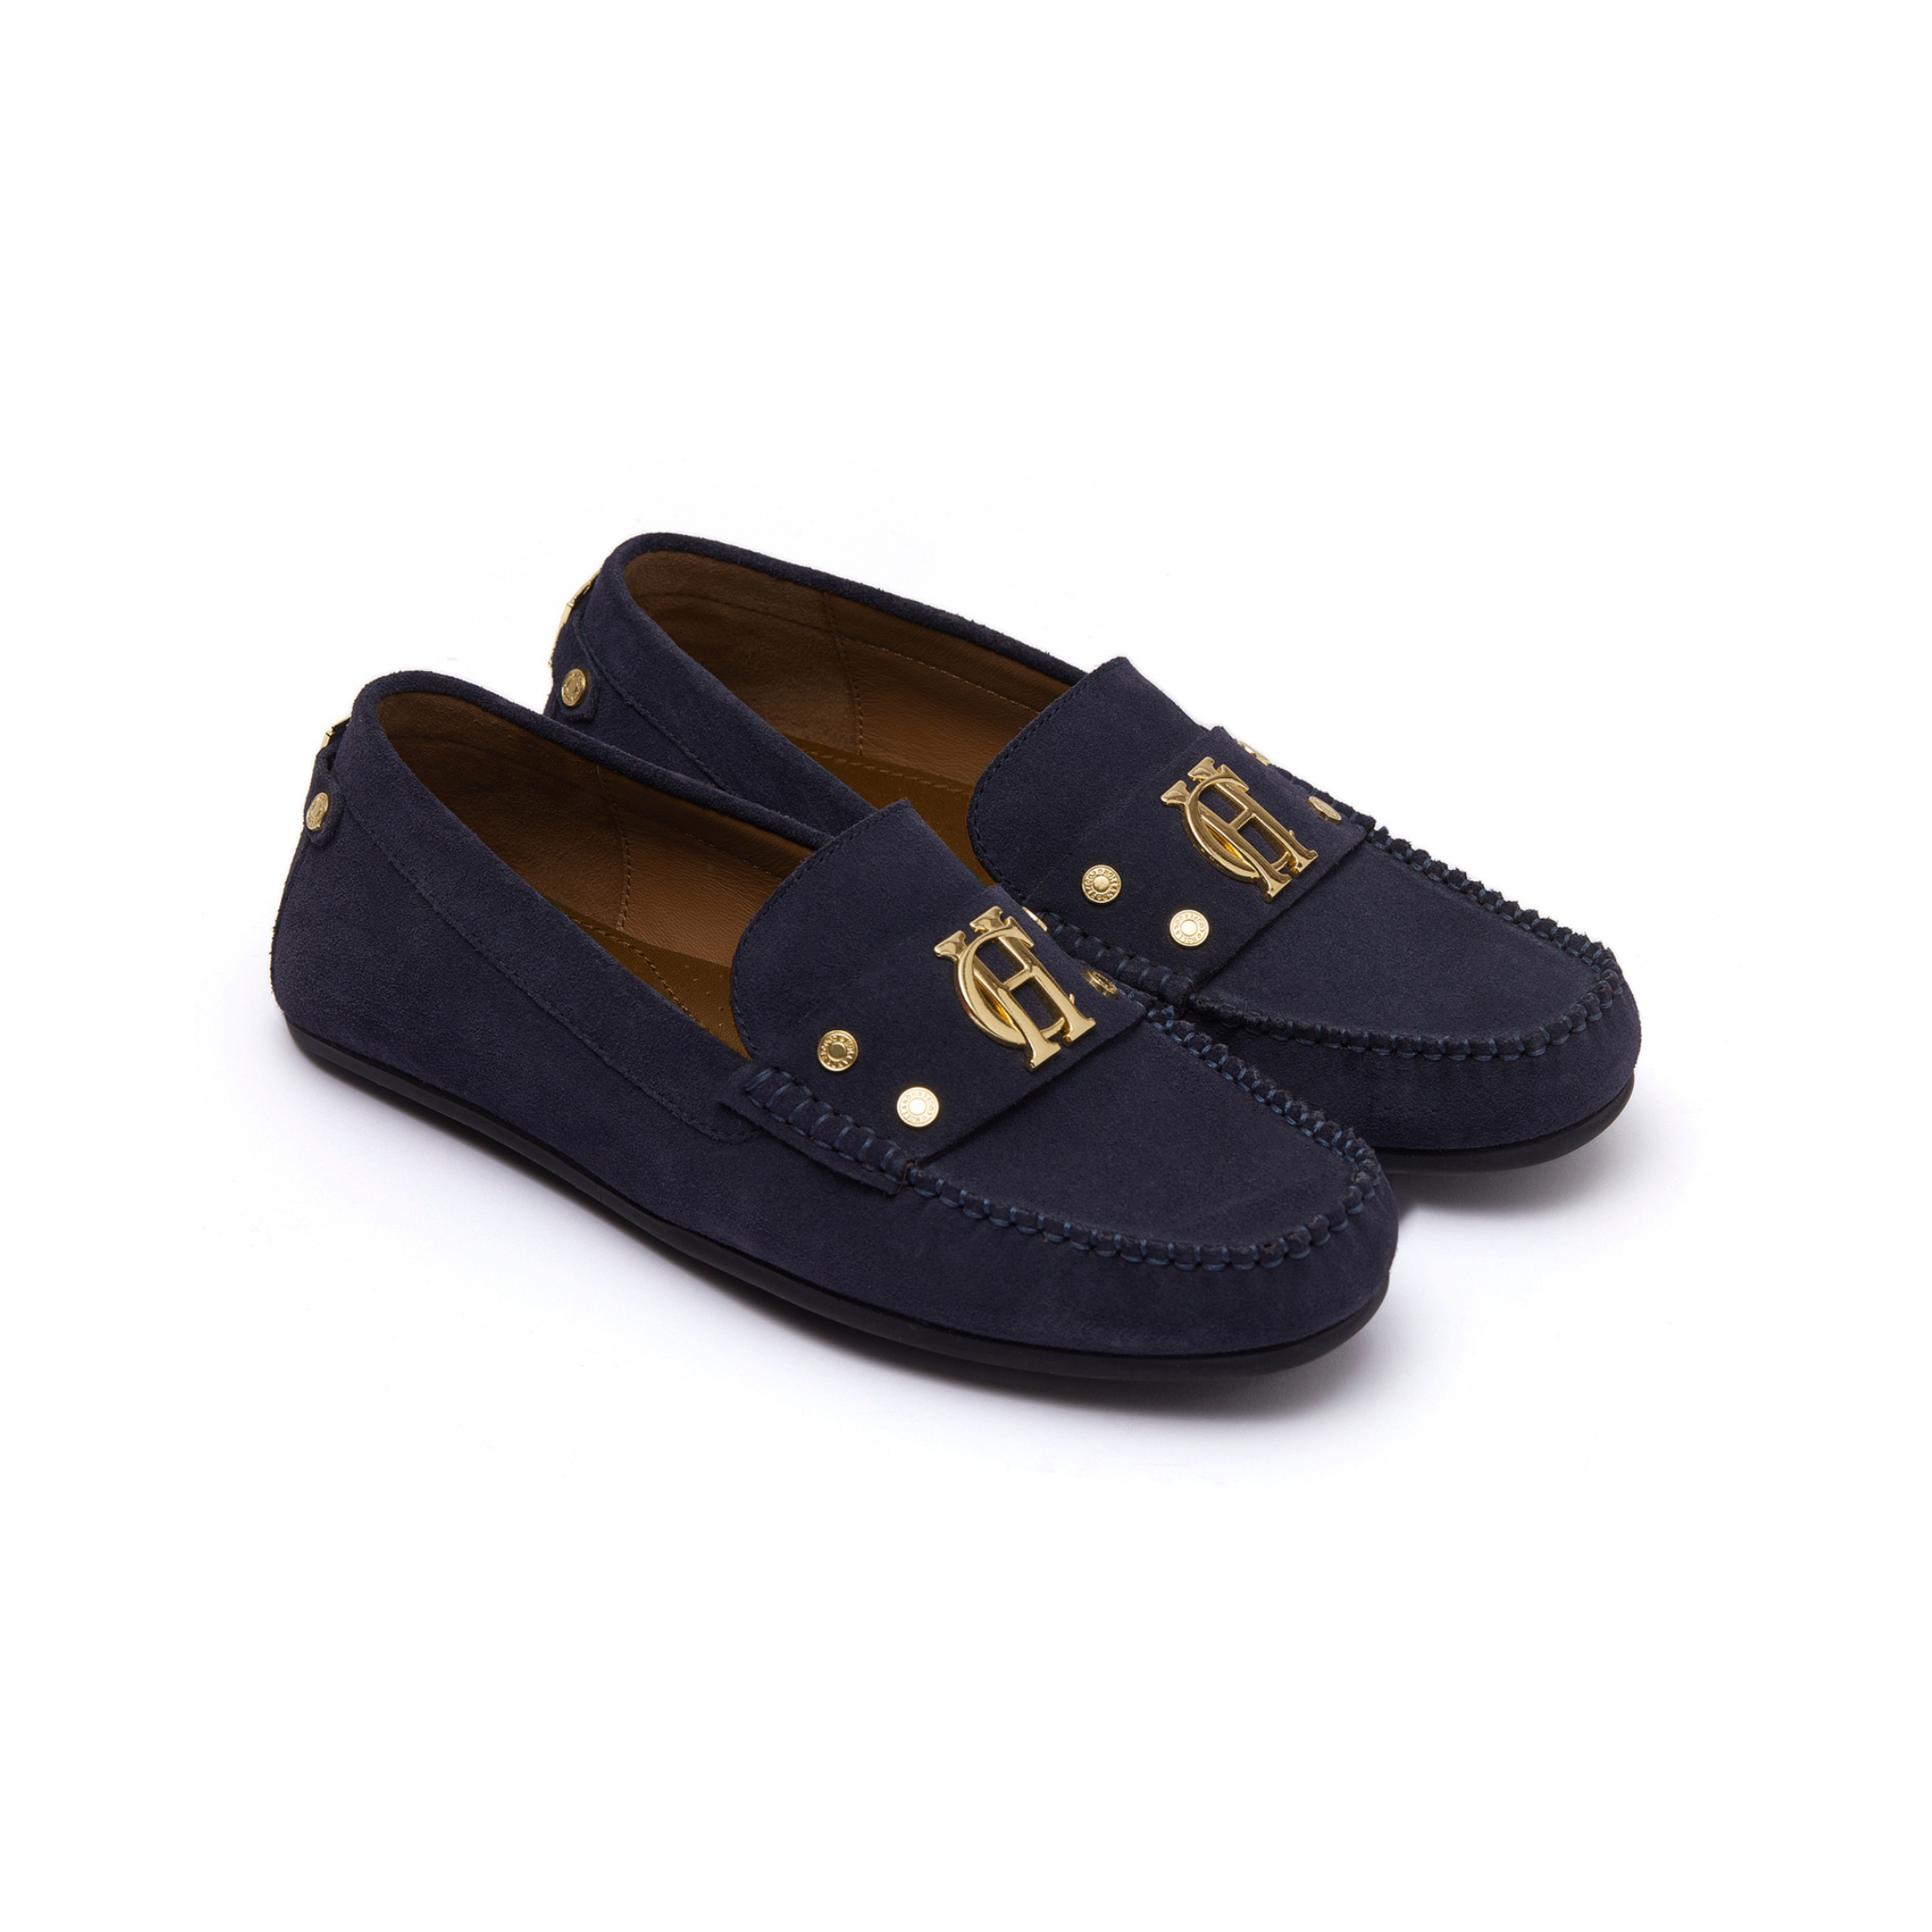 The Driving Loafer Ink Navy Suede